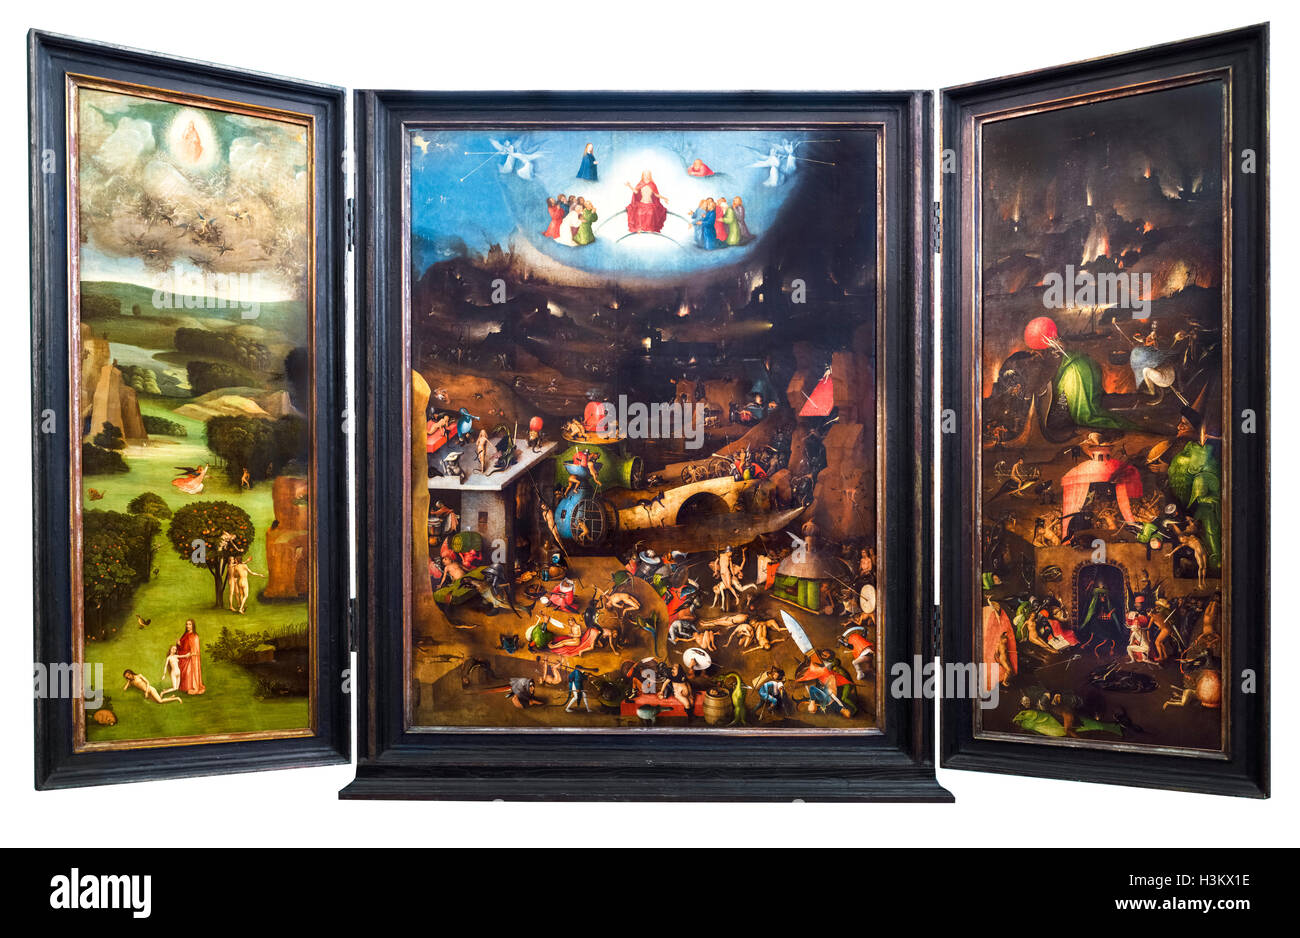 Hieronymus Bosch, The Last Judgment. Triptych of The Last Judgement by Hieronymus Bosch, oil on wood, c.1482. The work resides in the Academy of Fine Arts, Vienna, Austria. Stock Photo